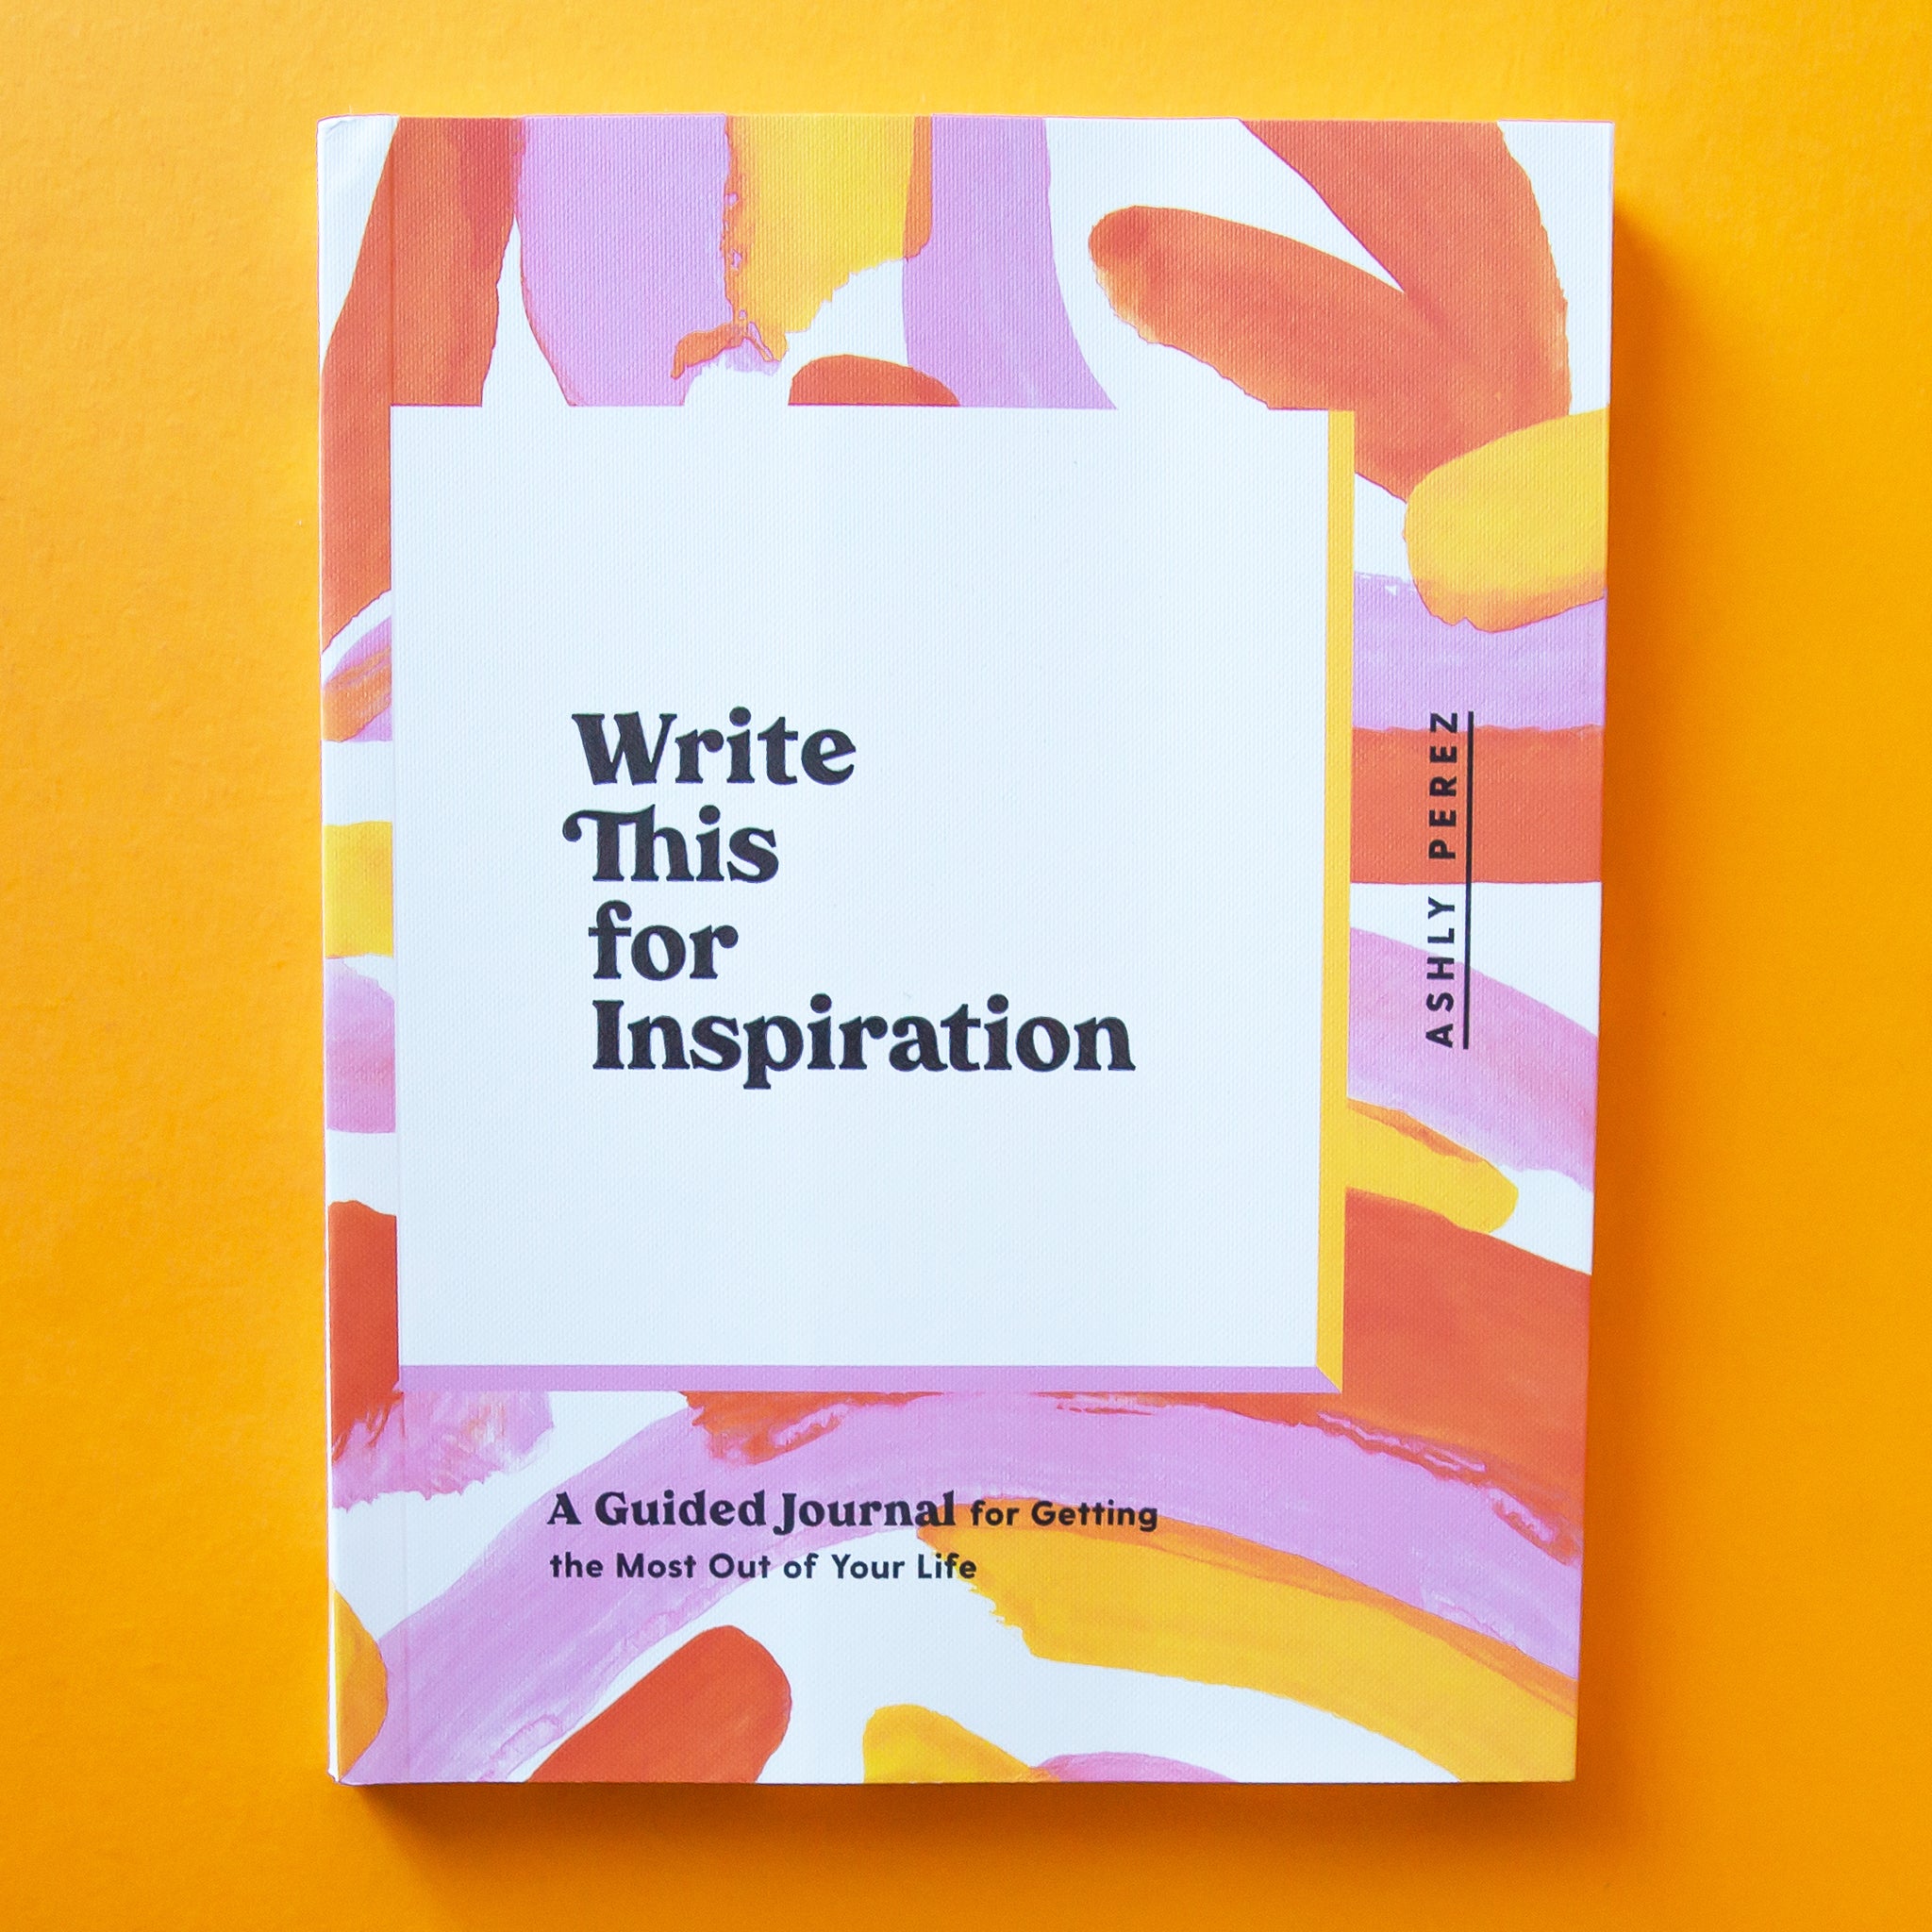 This journal is titled &#39;Write This for Inspiration by Ashly Perez&#39; in black lettering and has an enjoyable free-hand painted design with shades of pinks and oranges on top of a white background. The binding of the book is also white with the title spelt out in similar colorful lettering.